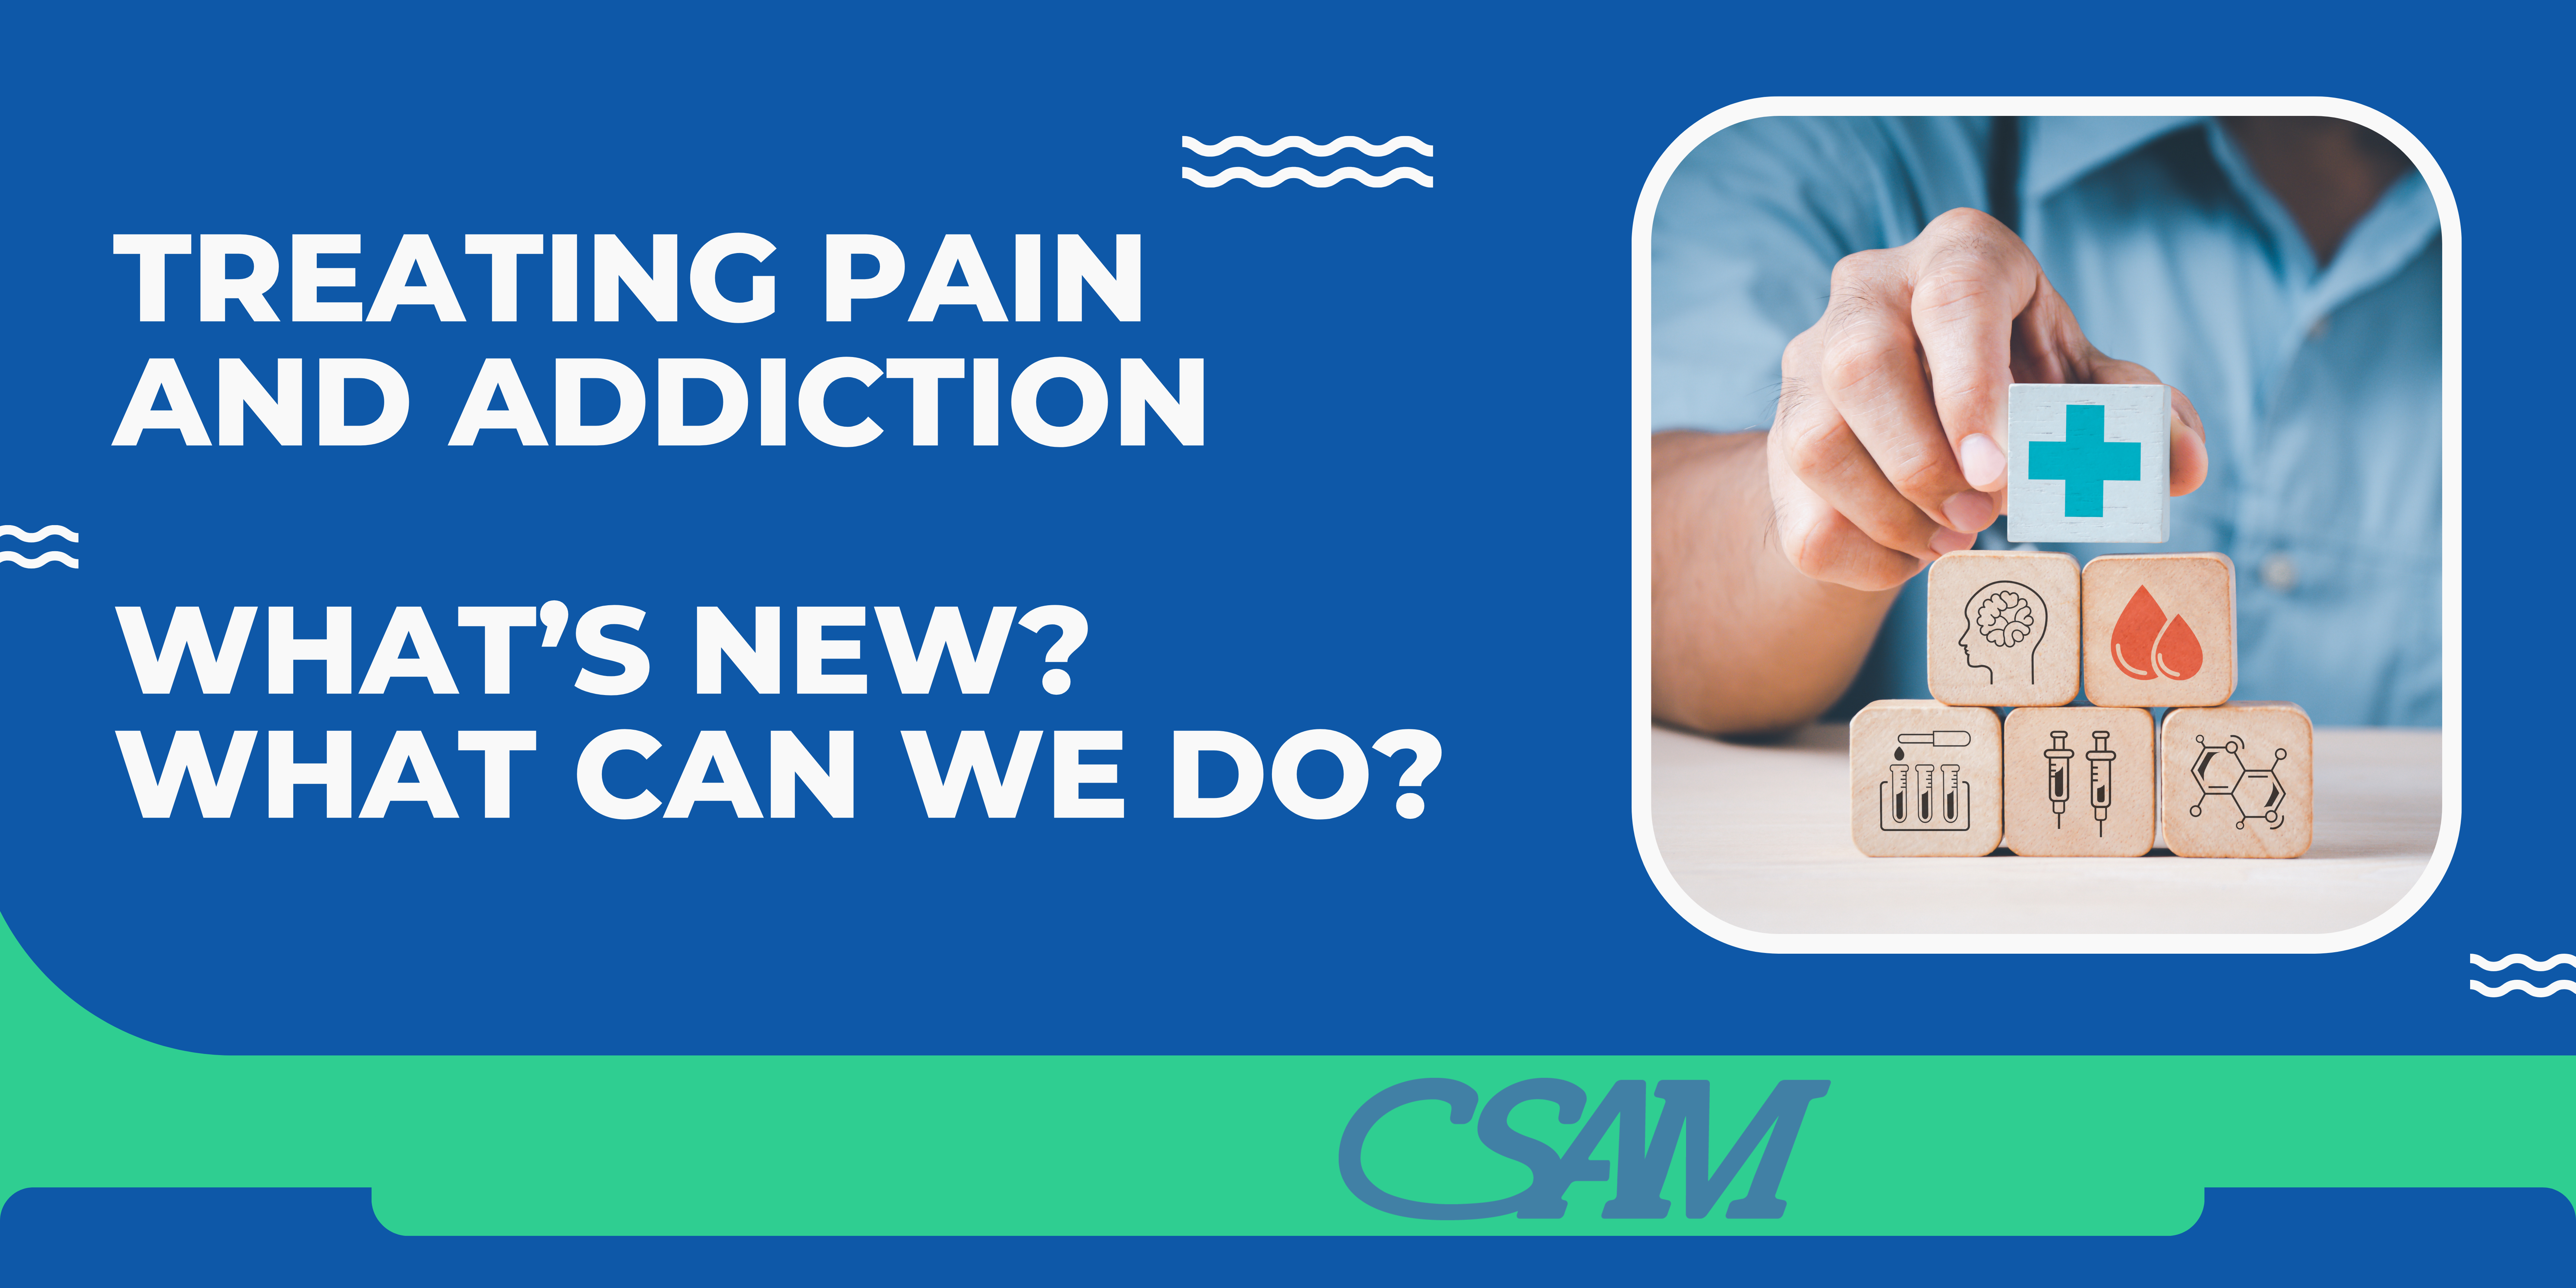 image for treating pain and addiction